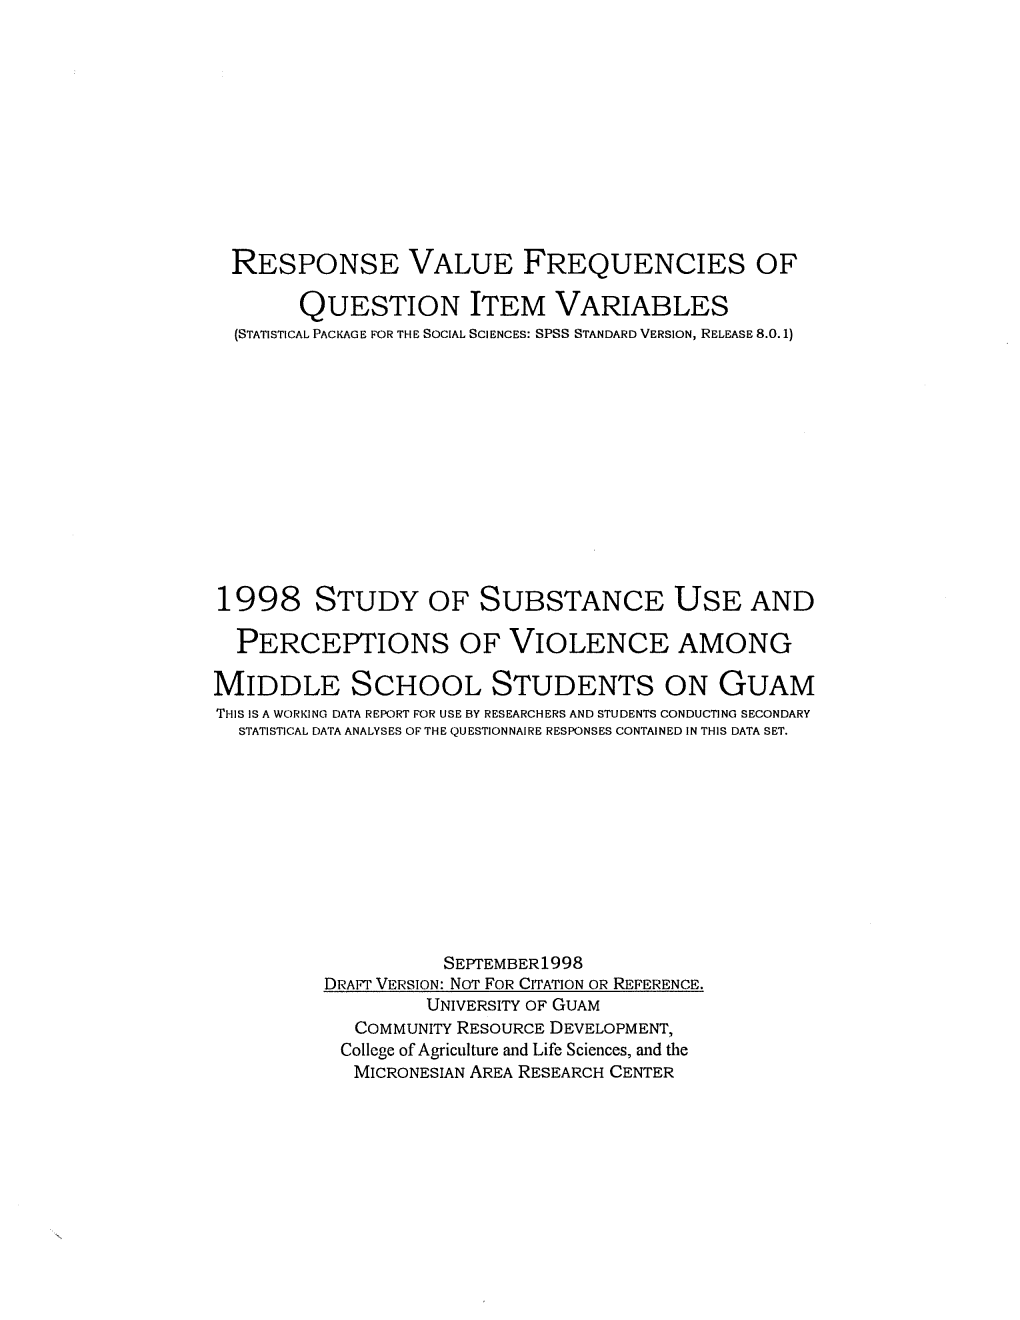 Response Value Frequencies of Question Item Variables 1998 Study of Substance Use and Perceptions of Violence Among Middle Schoo